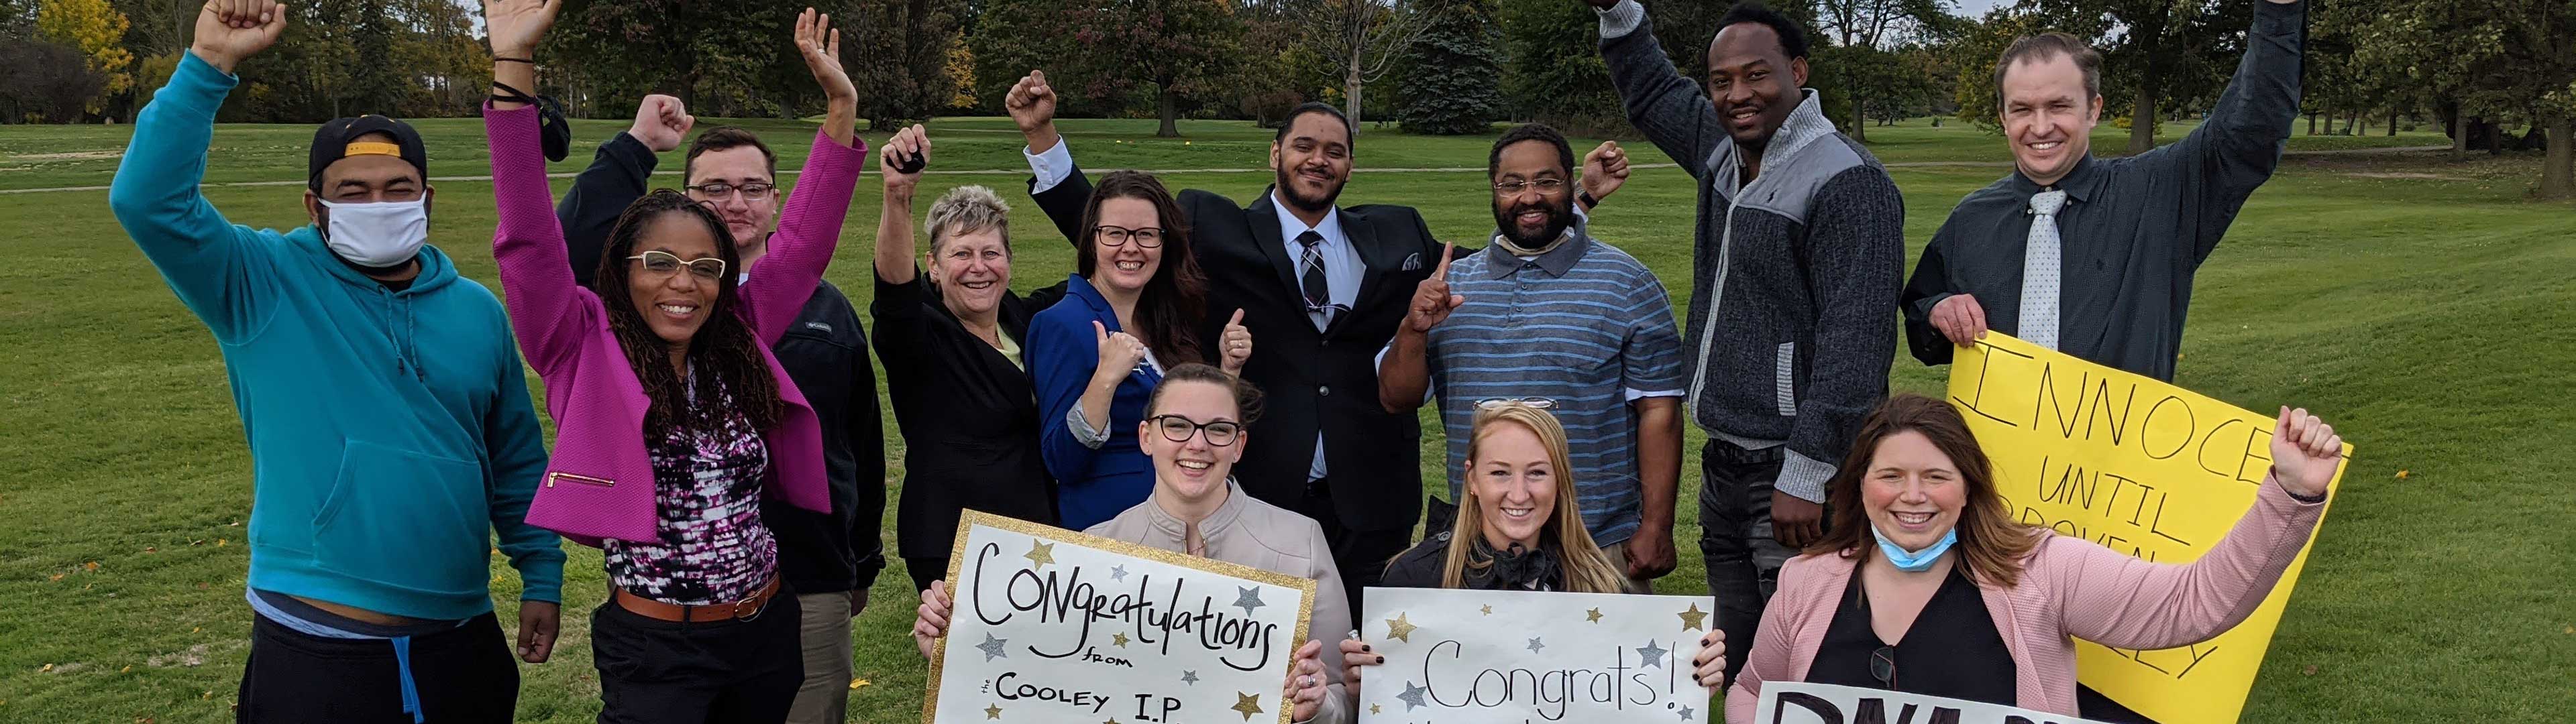 Commitment to Social Justice and Access at Cooley Law School